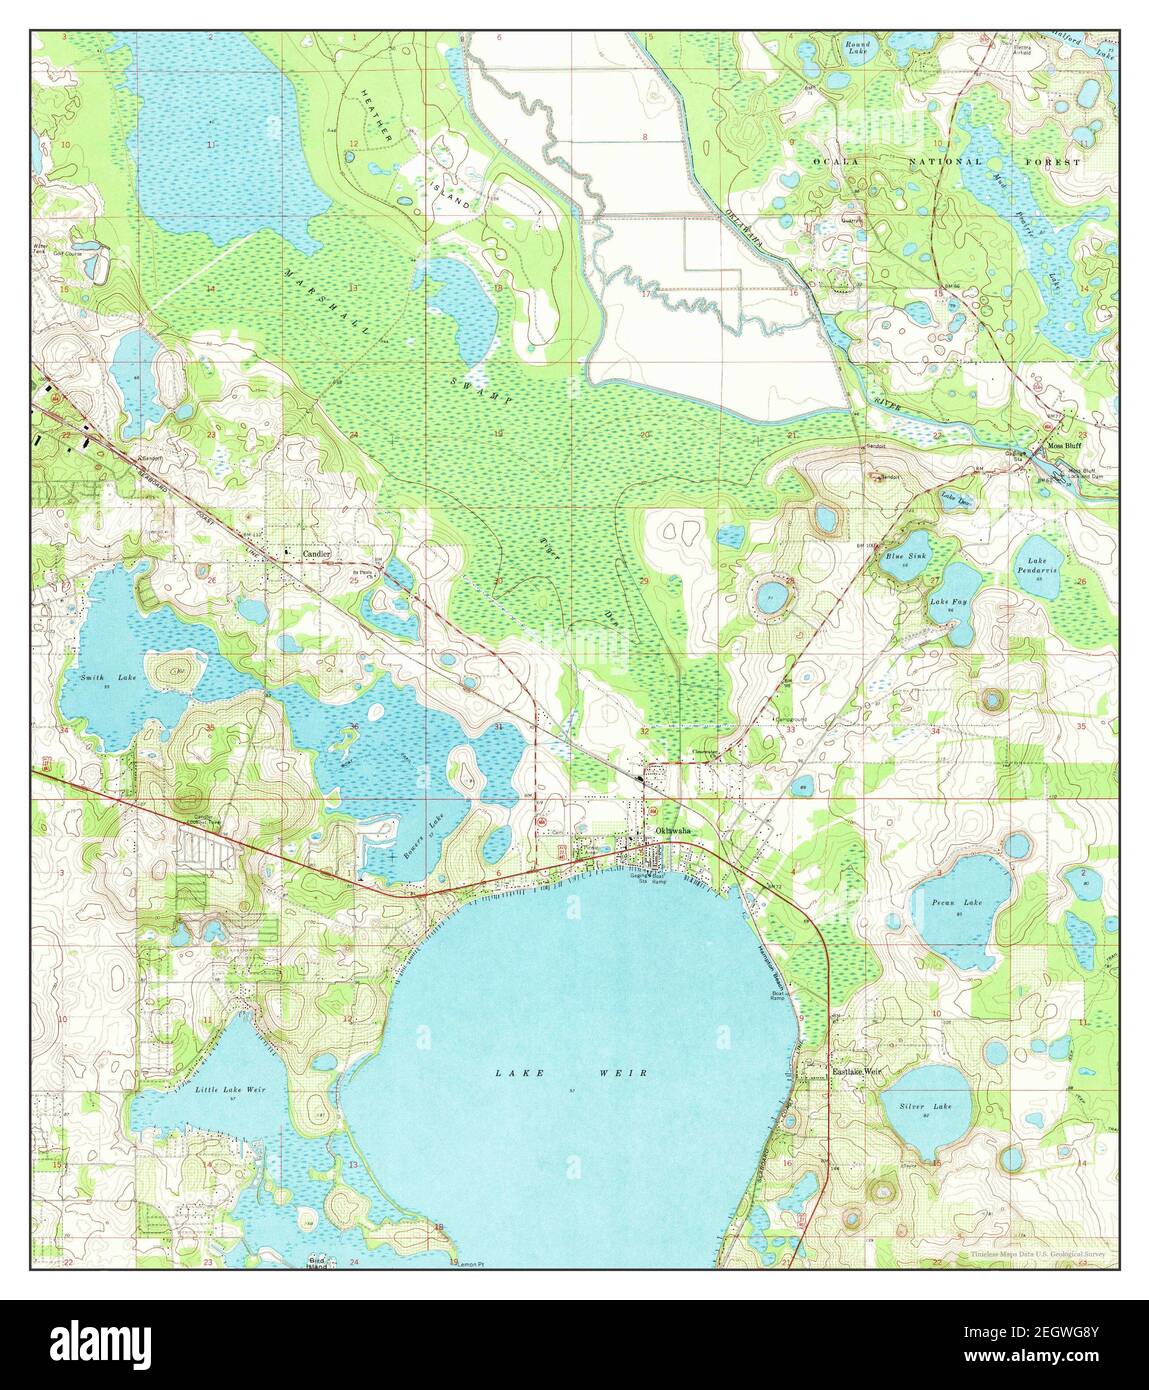 Lake Weir, Florida, map 1970, 1:24000, United States of America by Timeless Maps, data U.S. Geological Survey Stock Photo